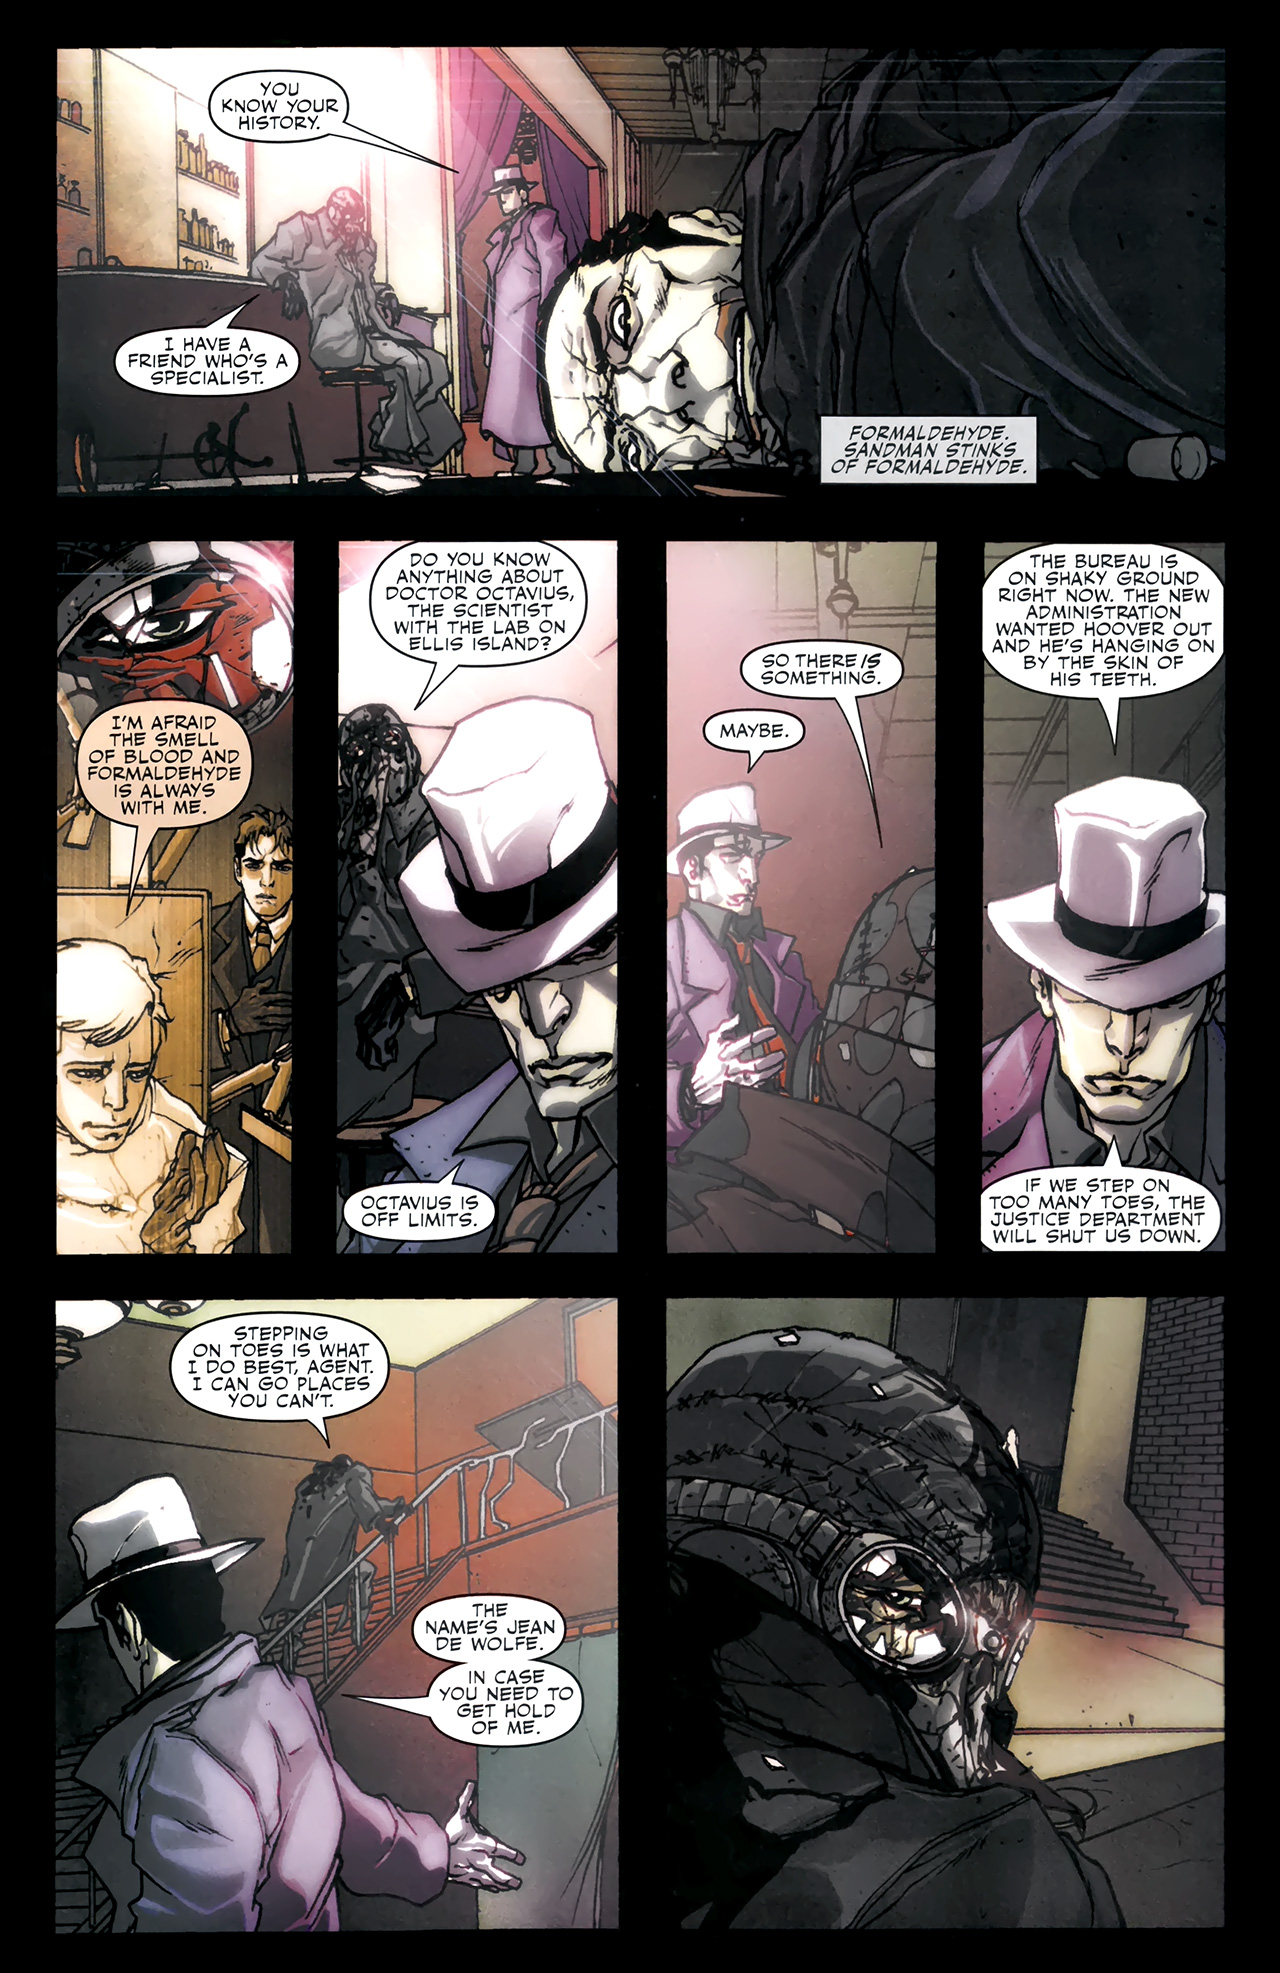 Spider-Man Noir Eyes Without A Face #3 (of 4)